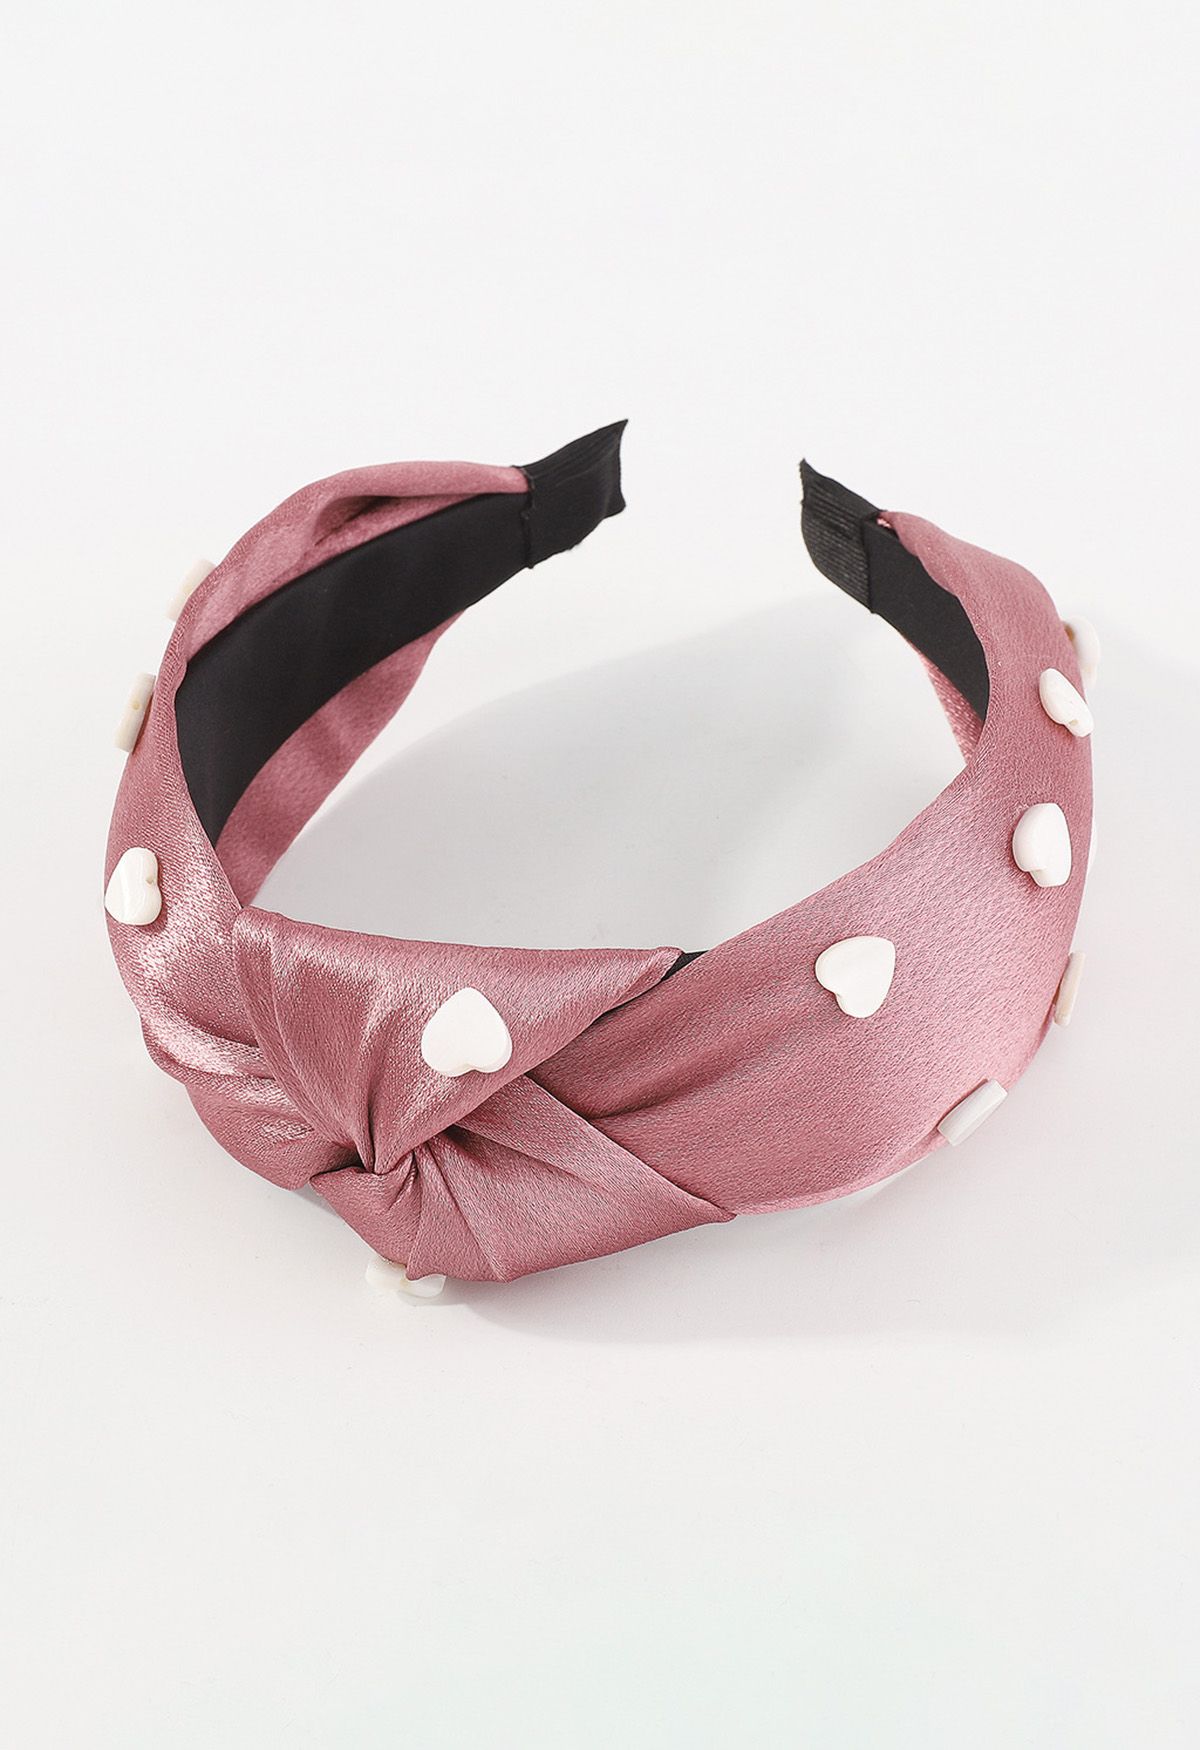 3D Heart Knotted Headband in Pink